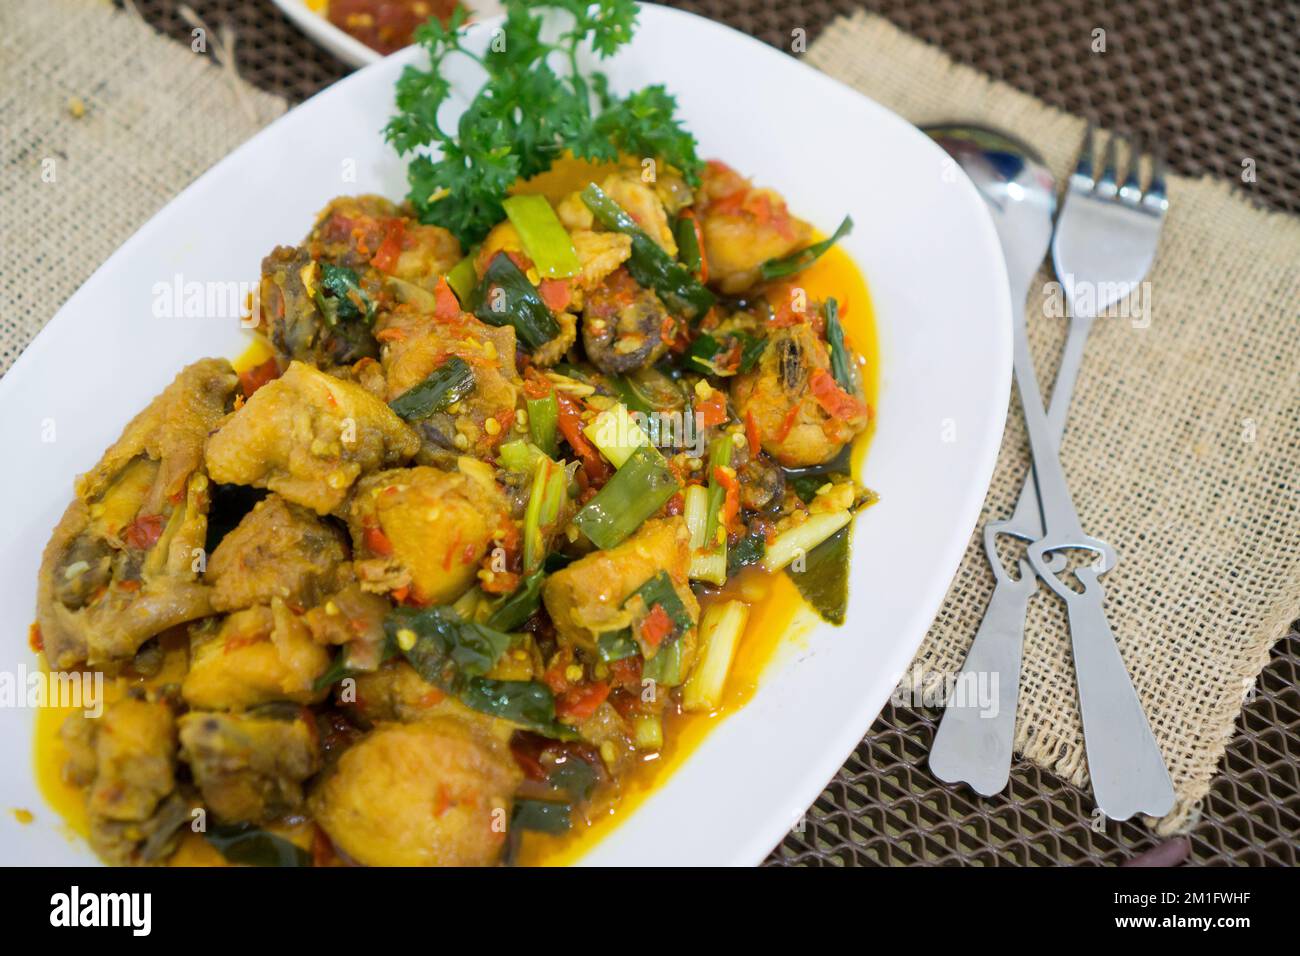 Ayam rica-rica is traditional food from Manado Indonesia chicken with spicy seasoning Stock Photo